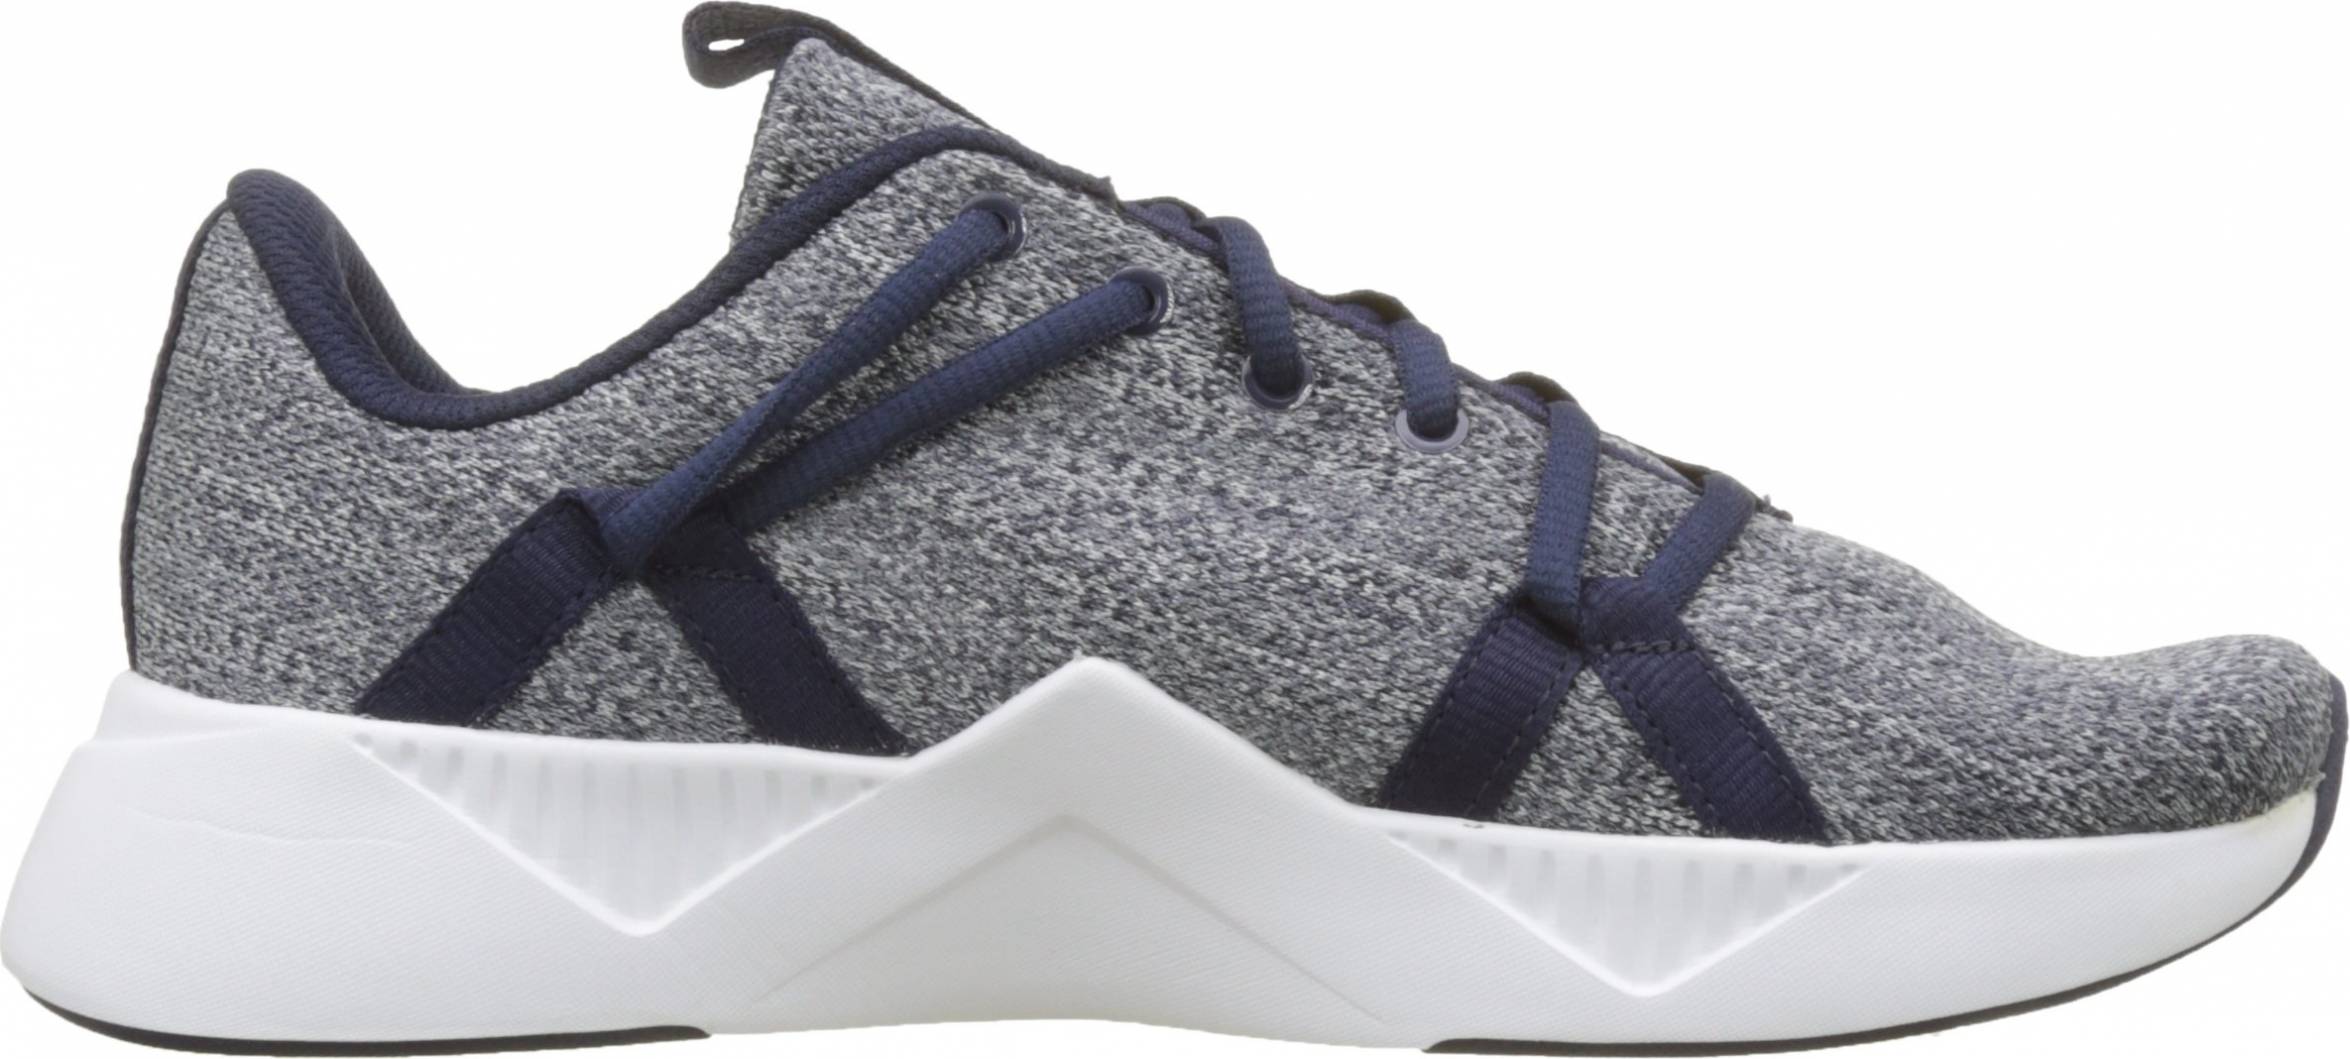 Only $43 + Review of Puma Incite Knit 